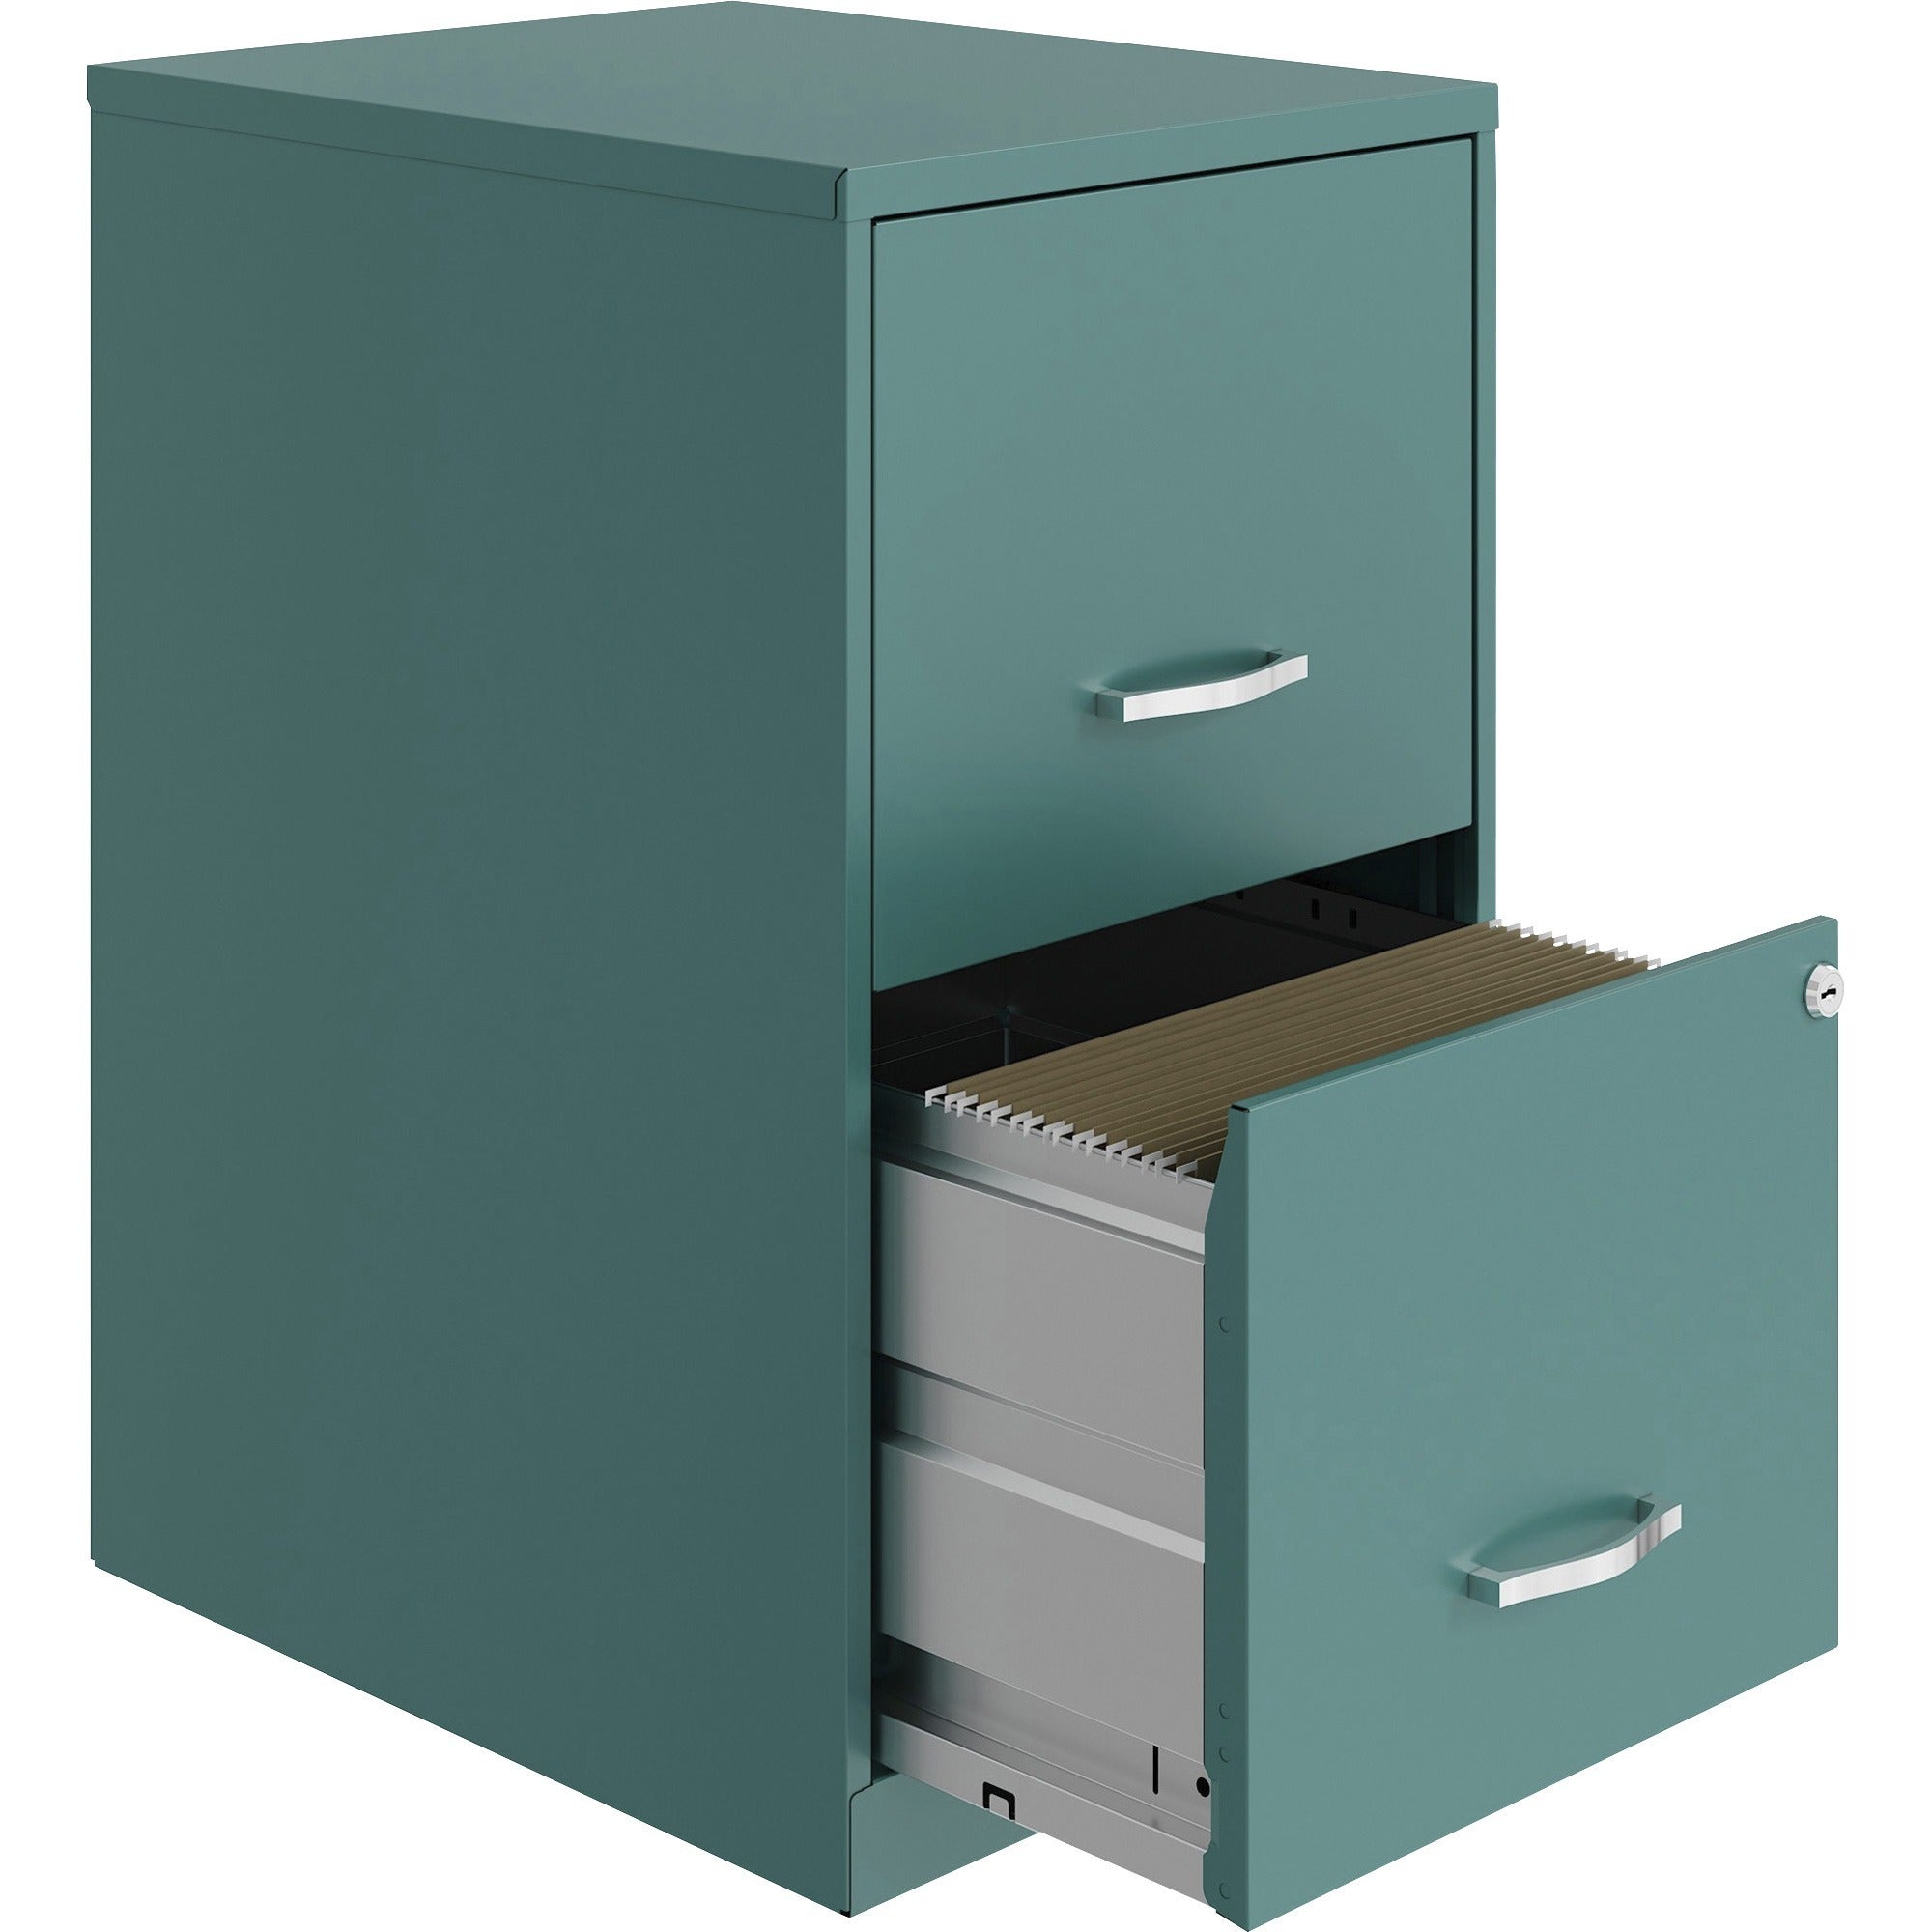 nusparc-file-cabinet-142-x-18-x-245-2-x-drawers-for-file-letter-vertical-locking-drawer-glide-suspension-nonporous-surface-teal-baked-enamel-steel-recycled_nprvf218aatl - 4